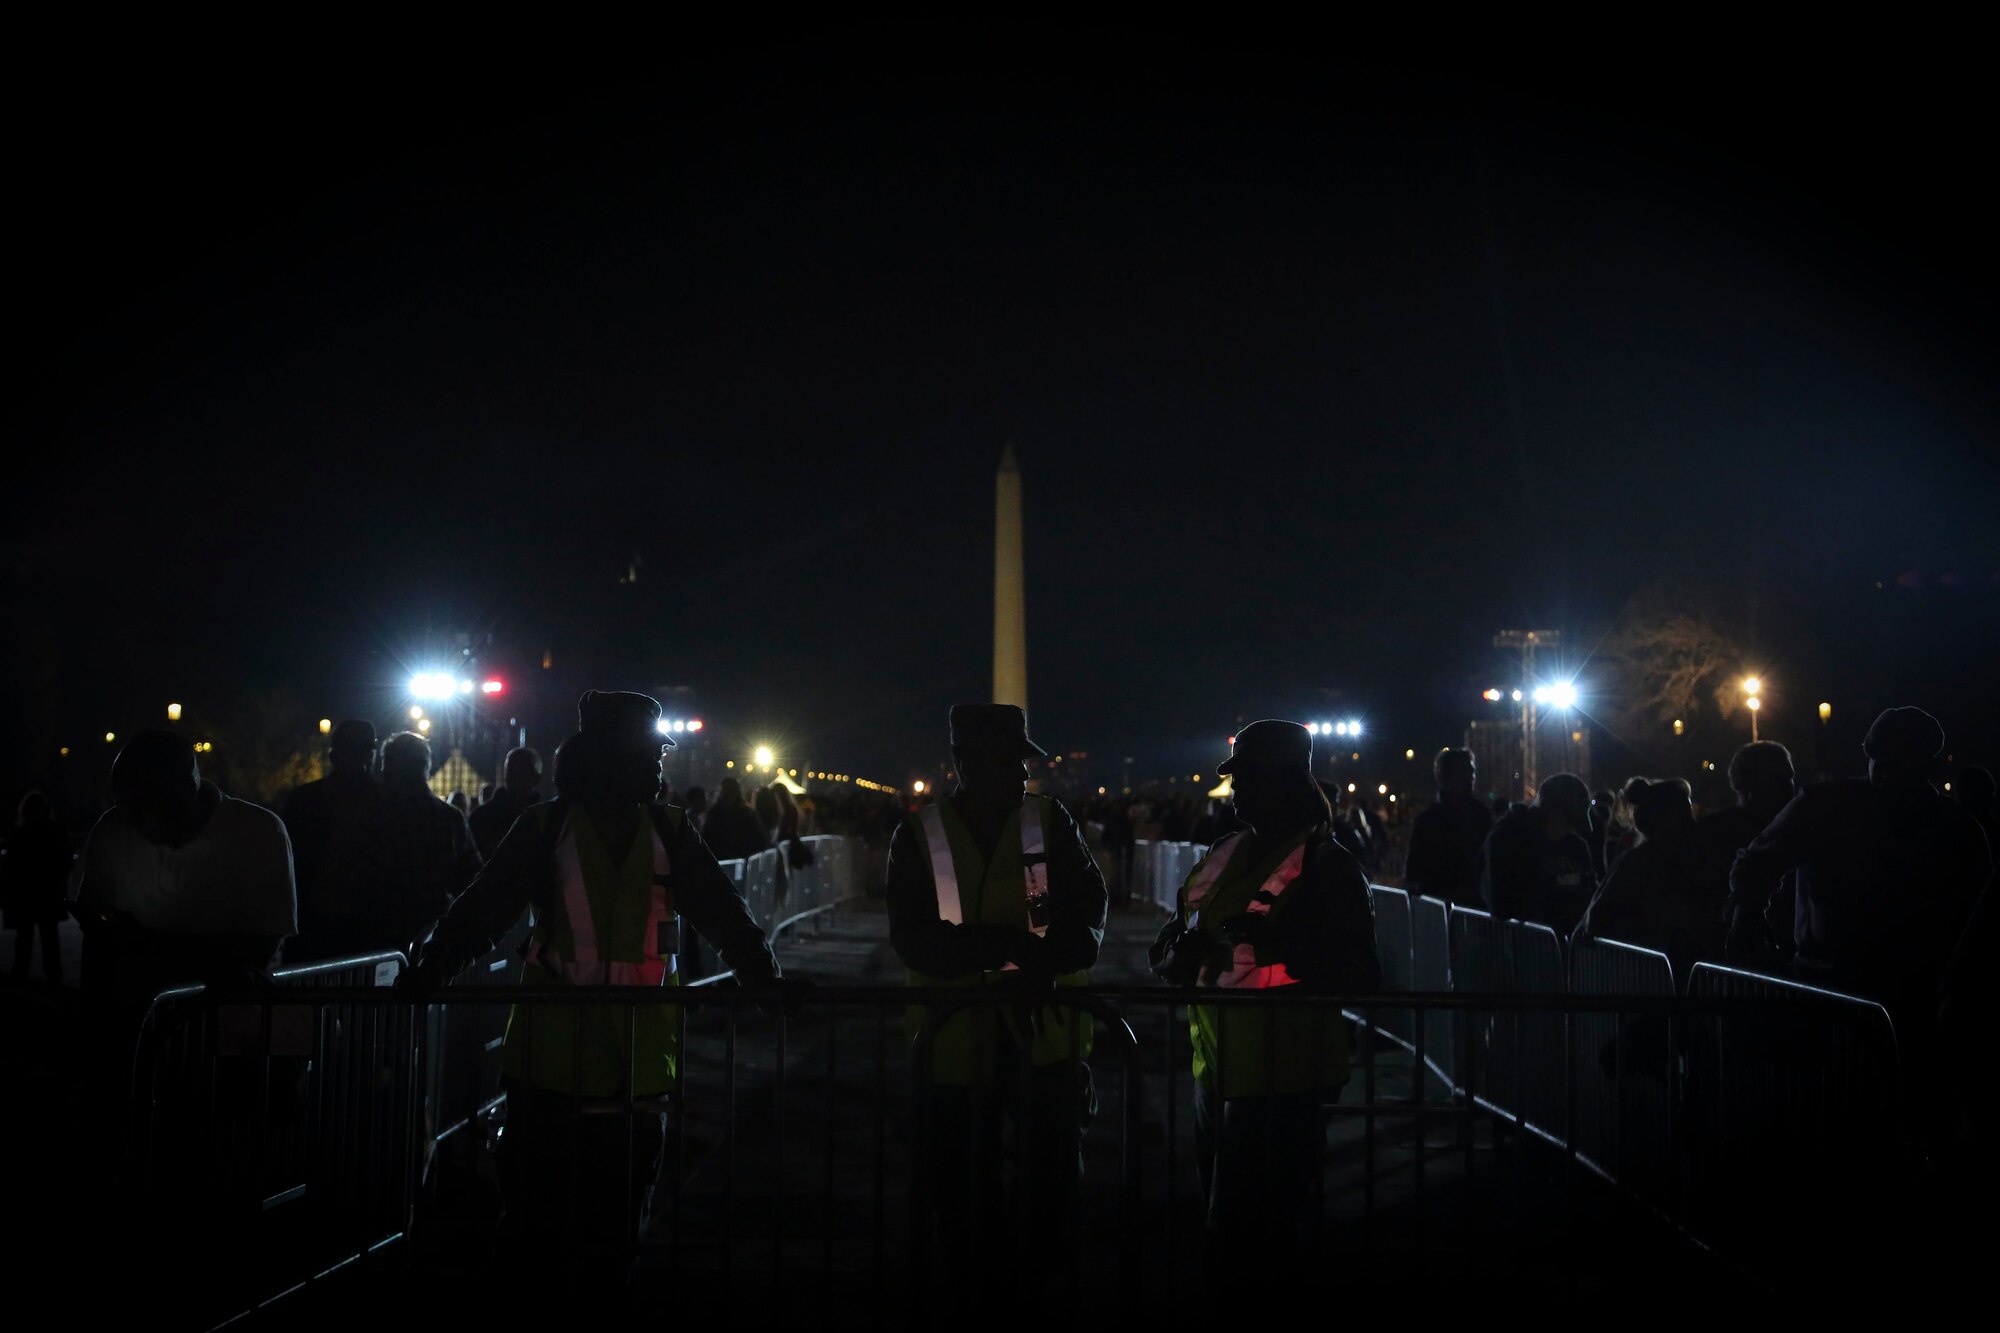 Airmen from the D.C. National Guard's 113th Wing provided crowd management, access point and perimeter protection functions during the "Concert for Valor" at the National Mall, Tuesday, Nov. 11, 2014. (U.S. Air National Guard photo by 1st Lt. Nathan Wallin)